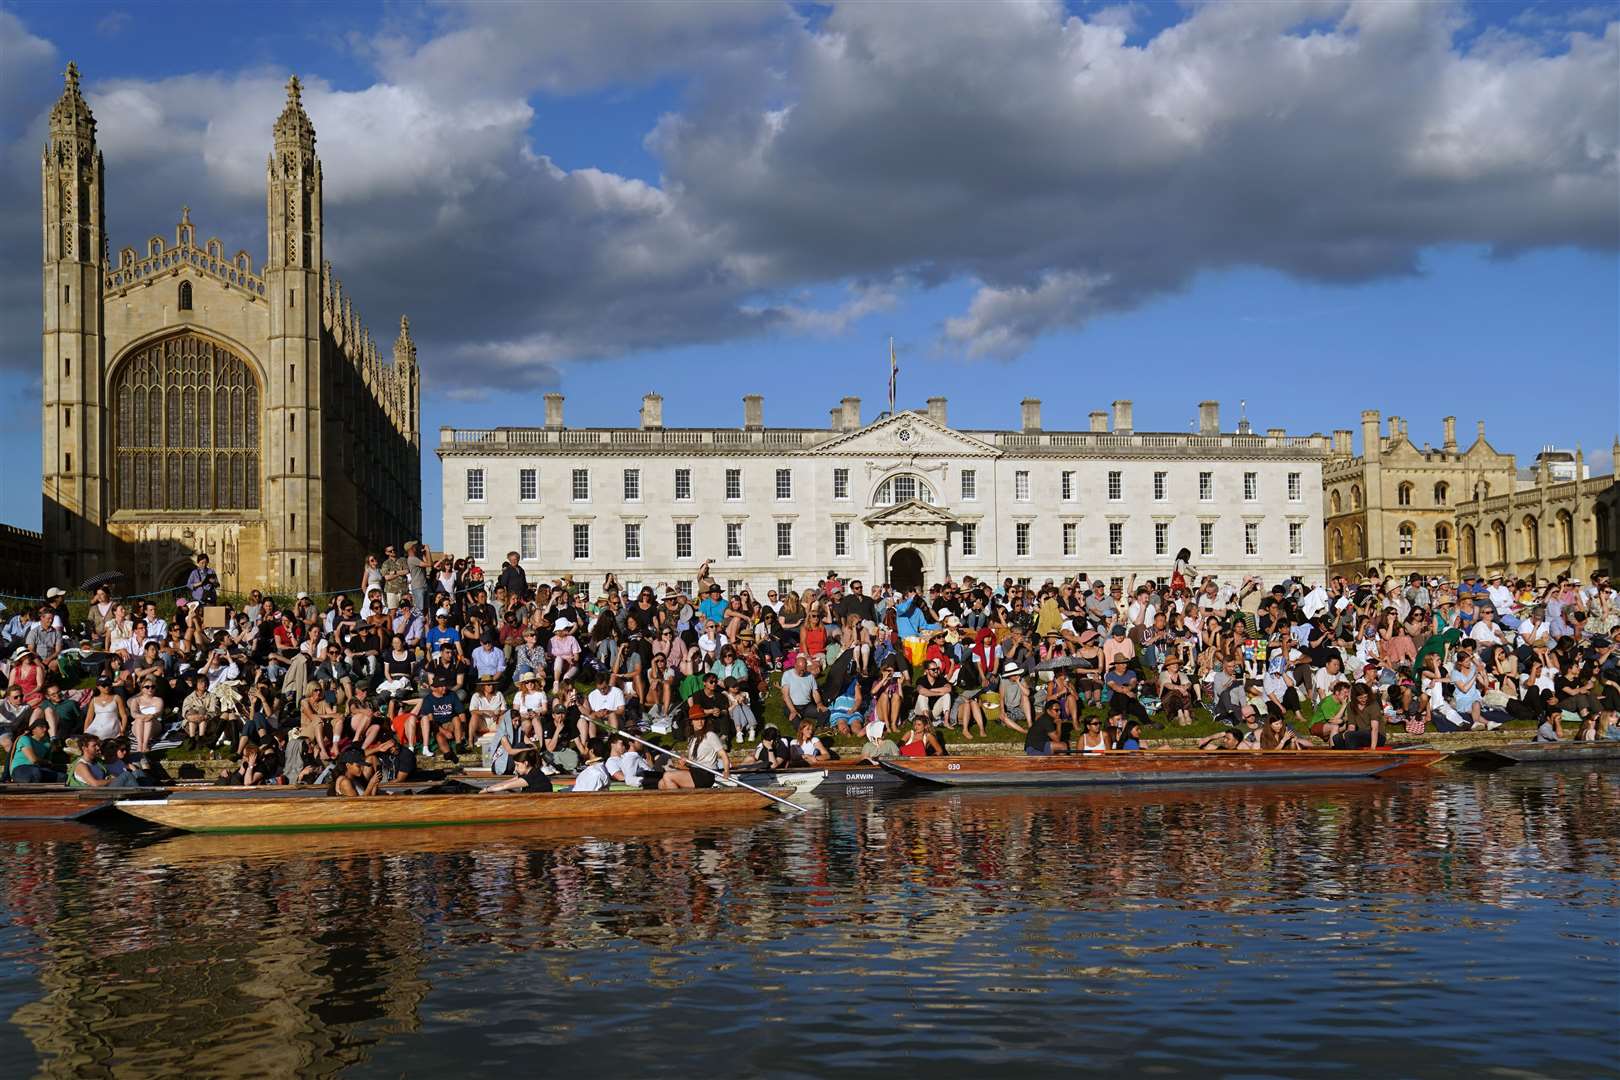 People sit on the banks of the River Cam, in punts on the water and on the lawns of King’s College in Cambridge, as they listen to The King’s Men perform (Joe Giddens/PA)